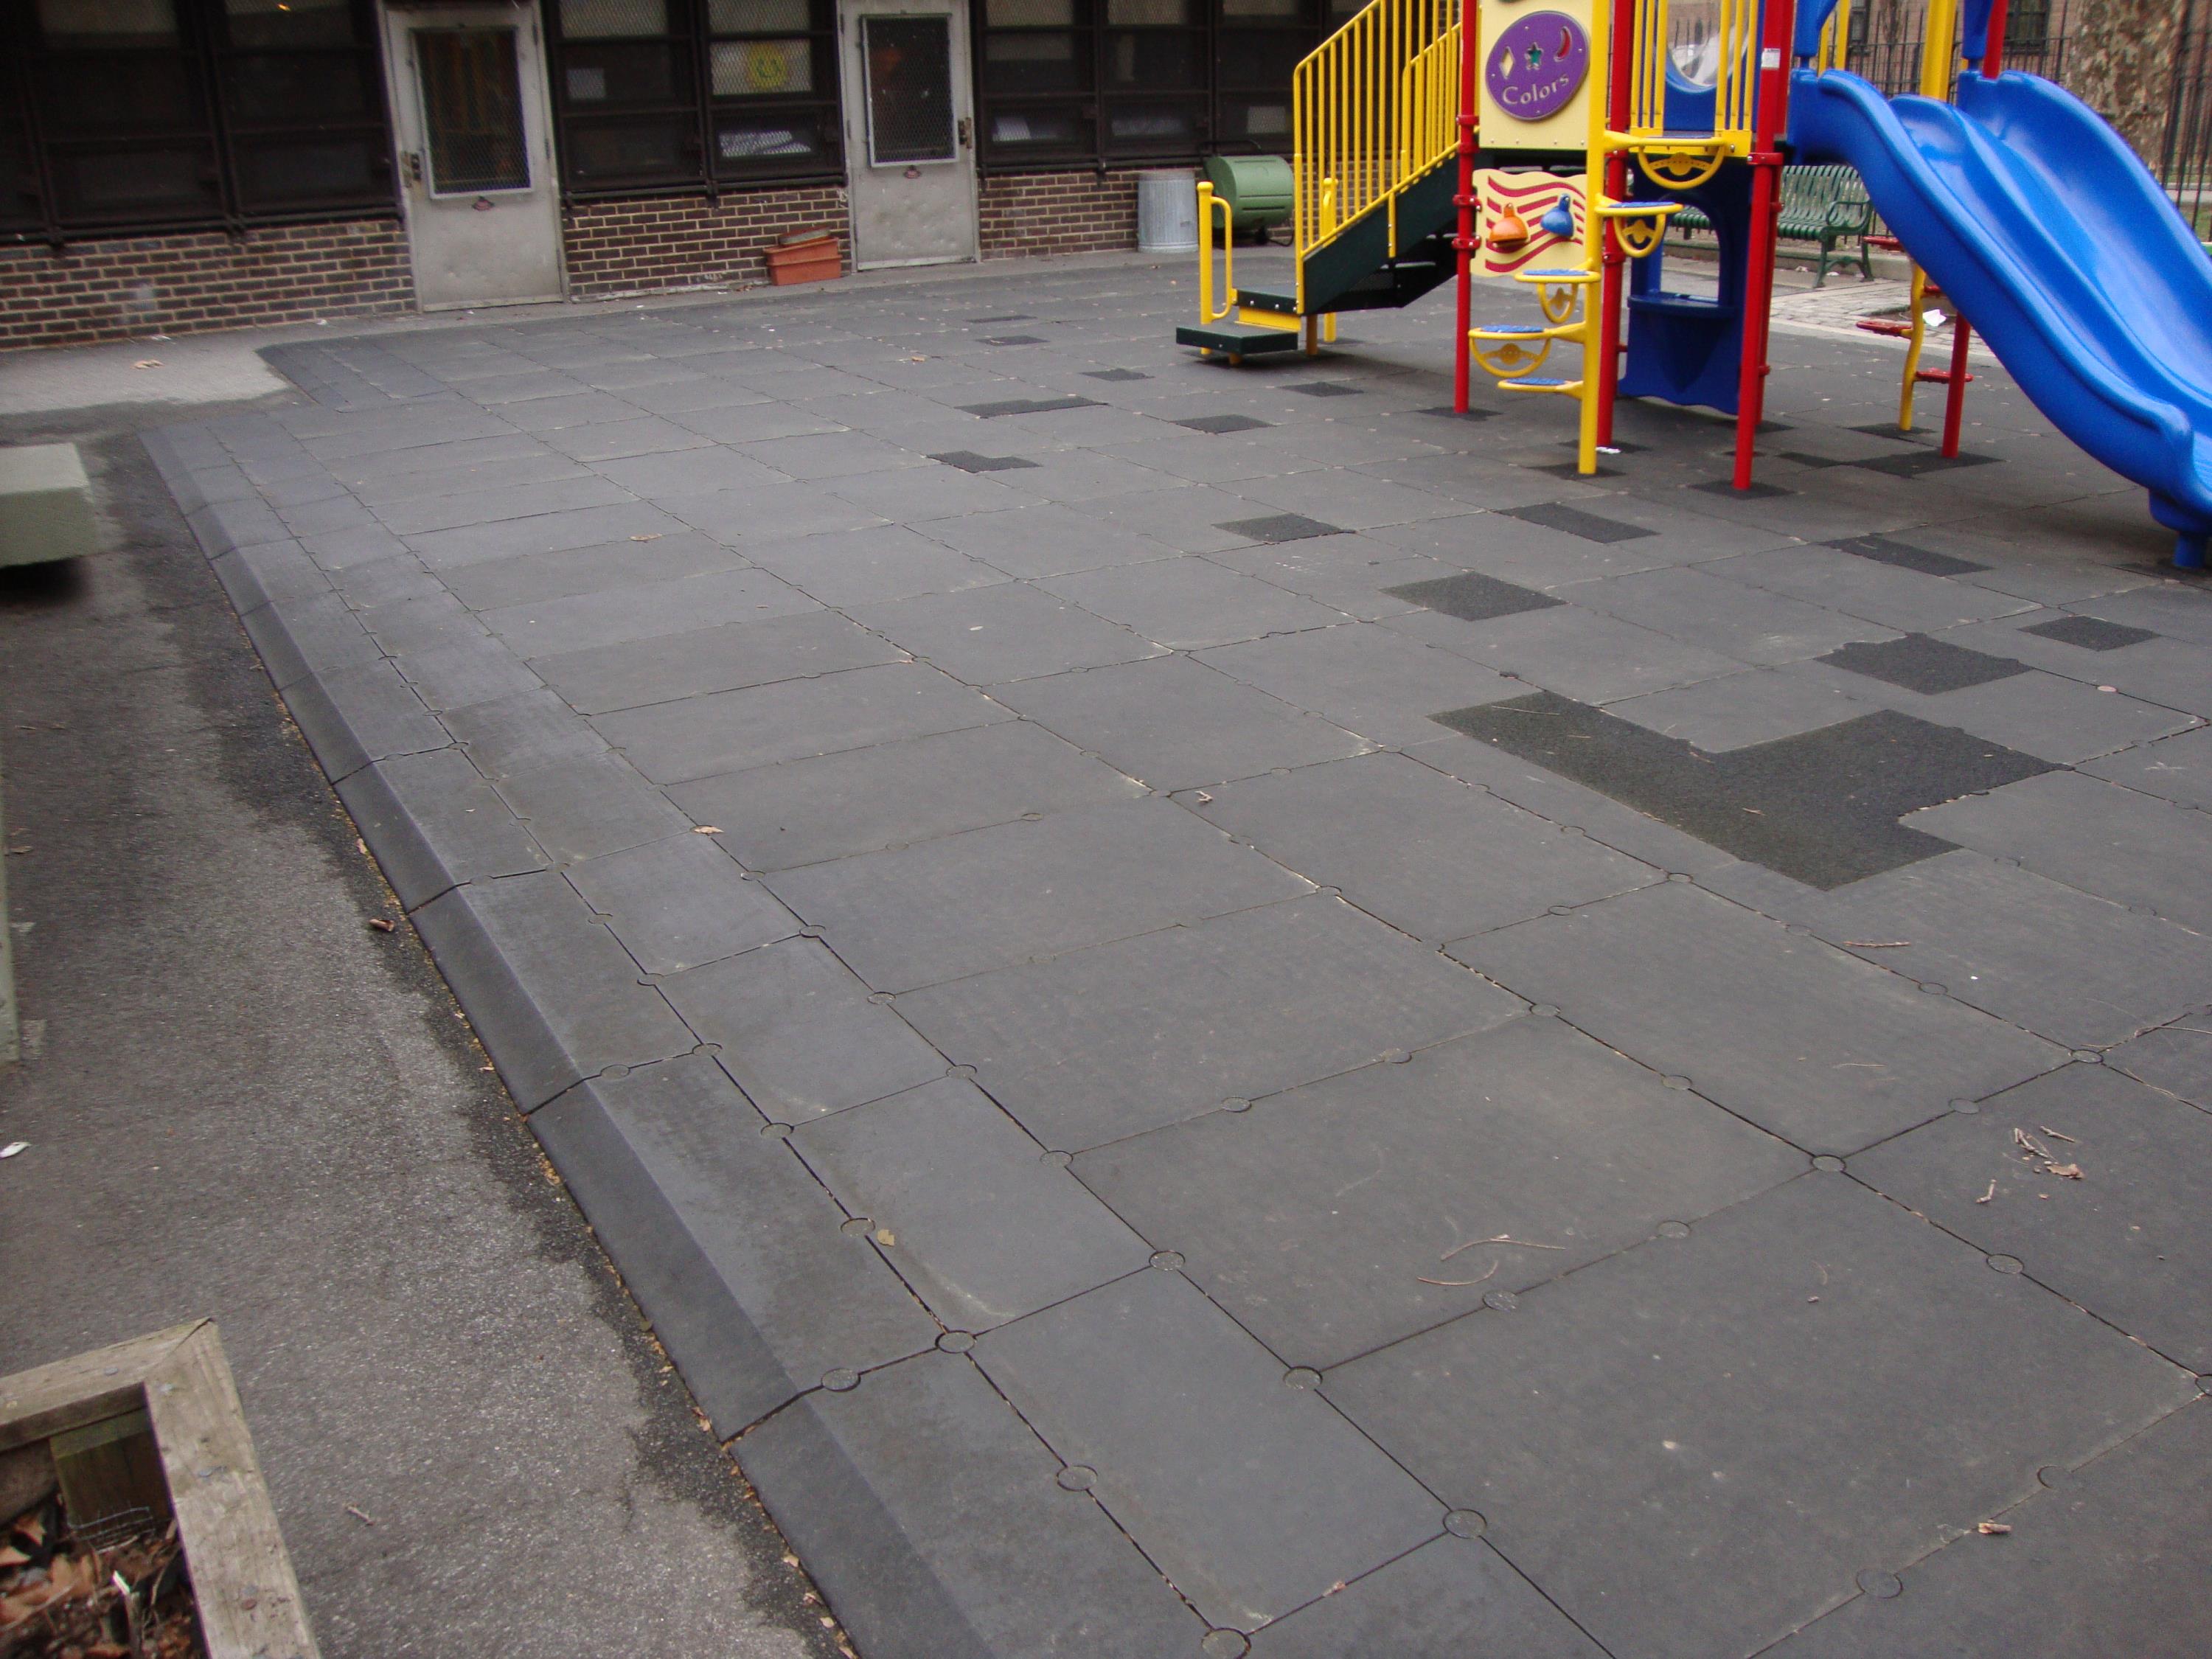 Tompkin Daycare Center Playground Area Using 2" Pave-Land Series c